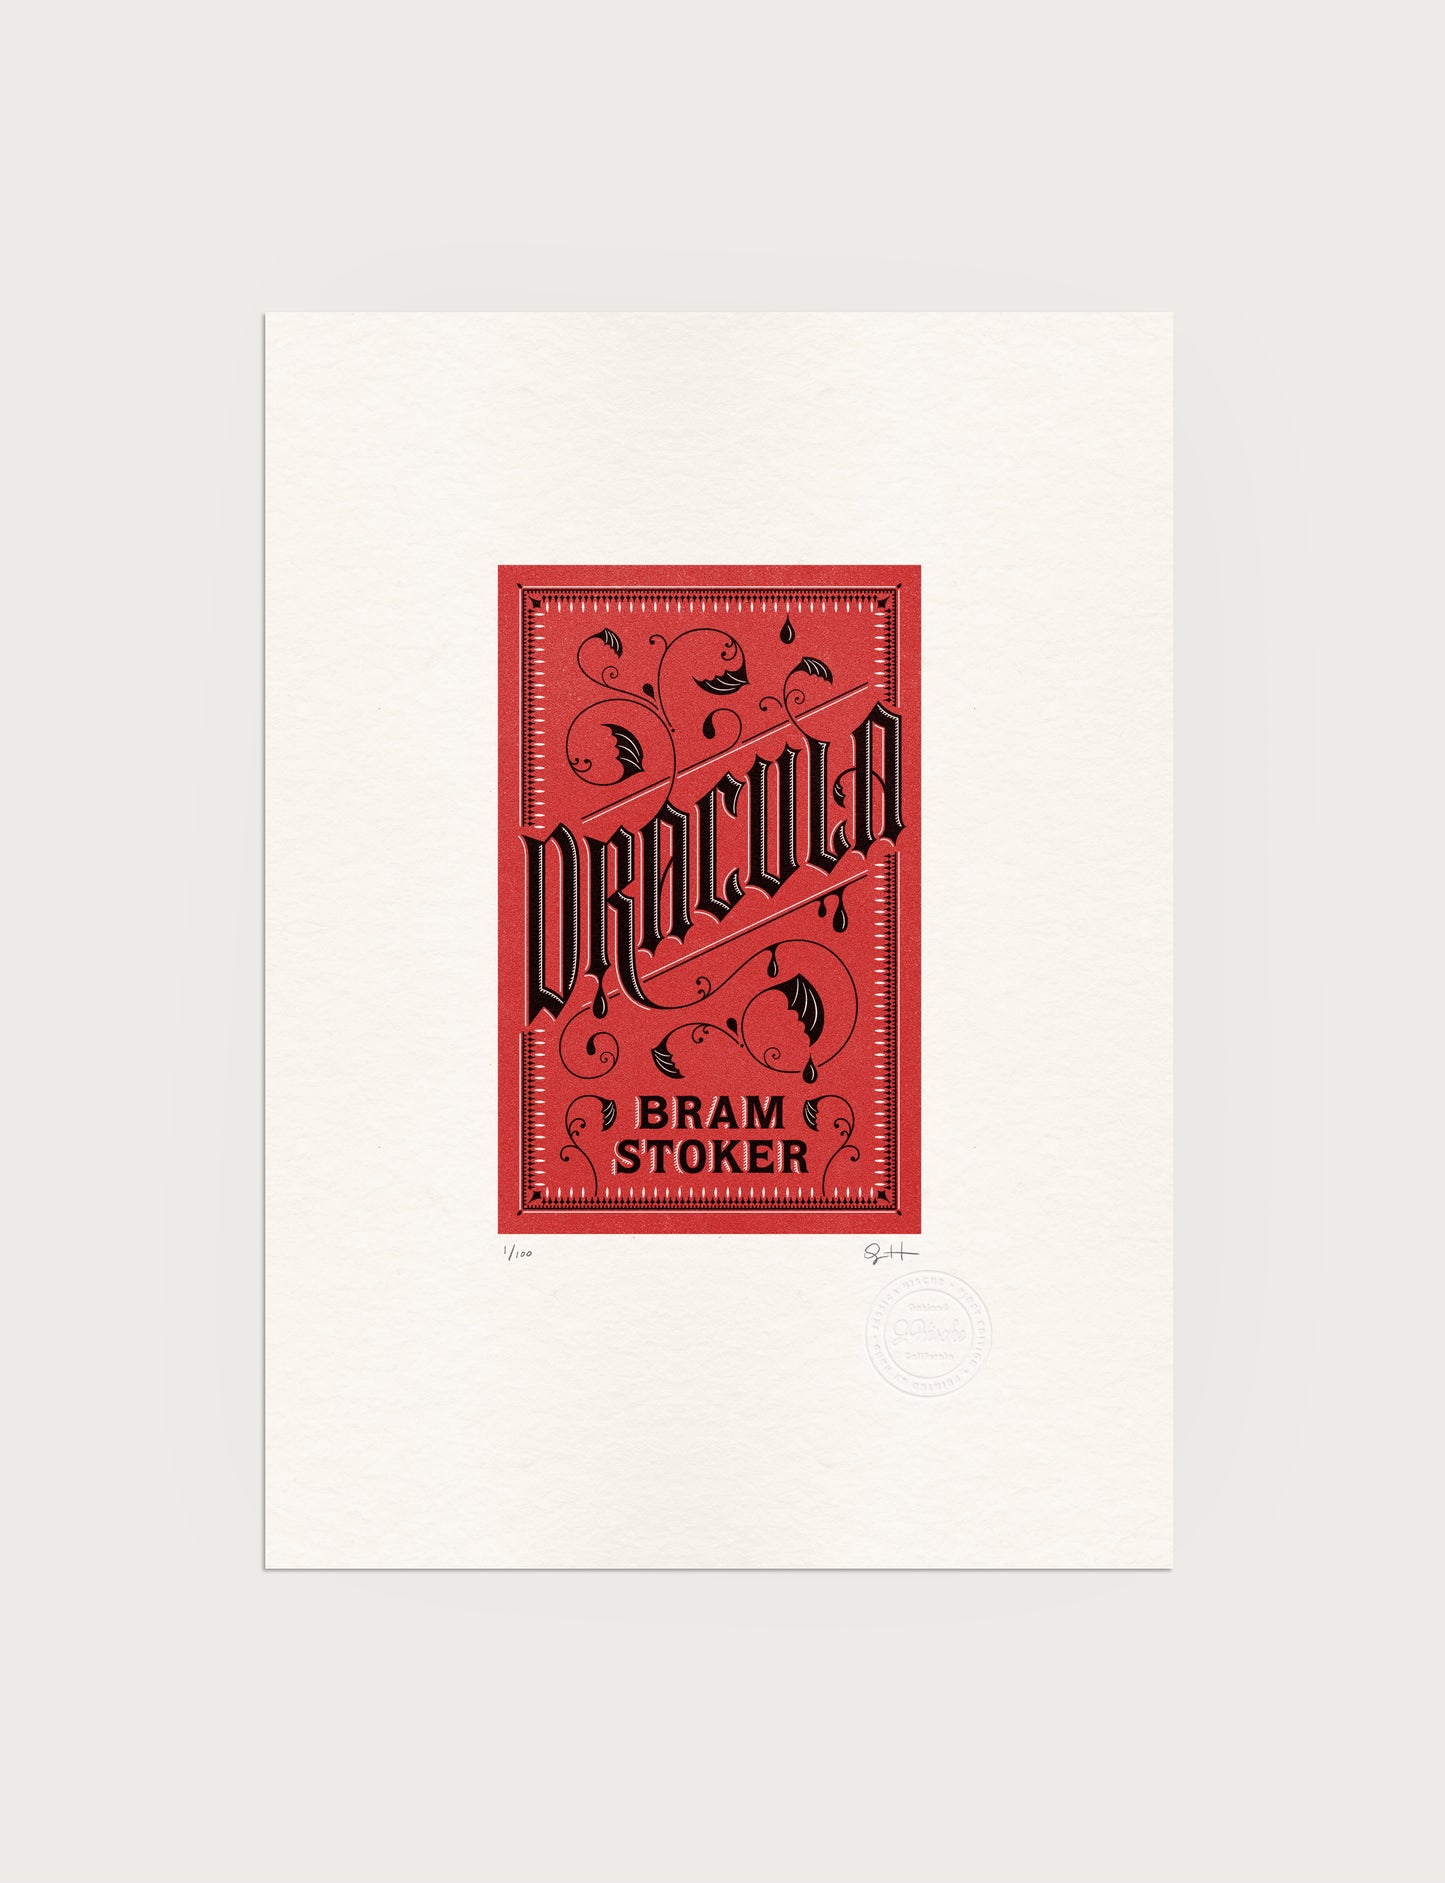 2-color letterpress print in red and black. Printed artwork is an illustrated book cover of Dracula including custom hand lettering.